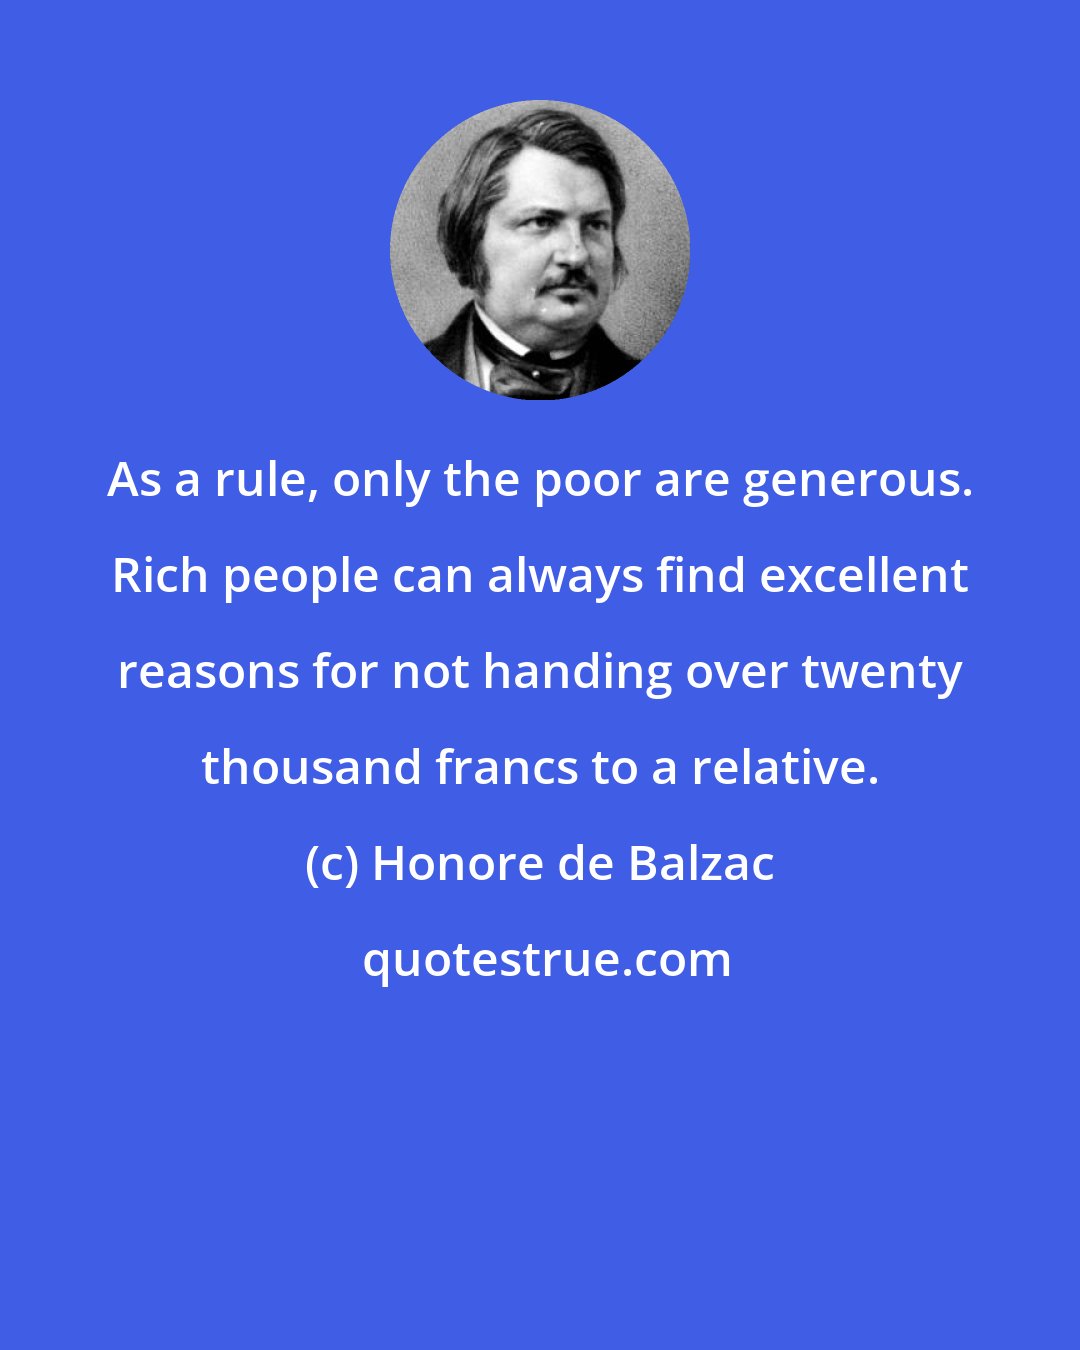 Honore de Balzac: As a rule, only the poor are generous. Rich people can always find excellent reasons for not handing over twenty thousand francs to a relative.